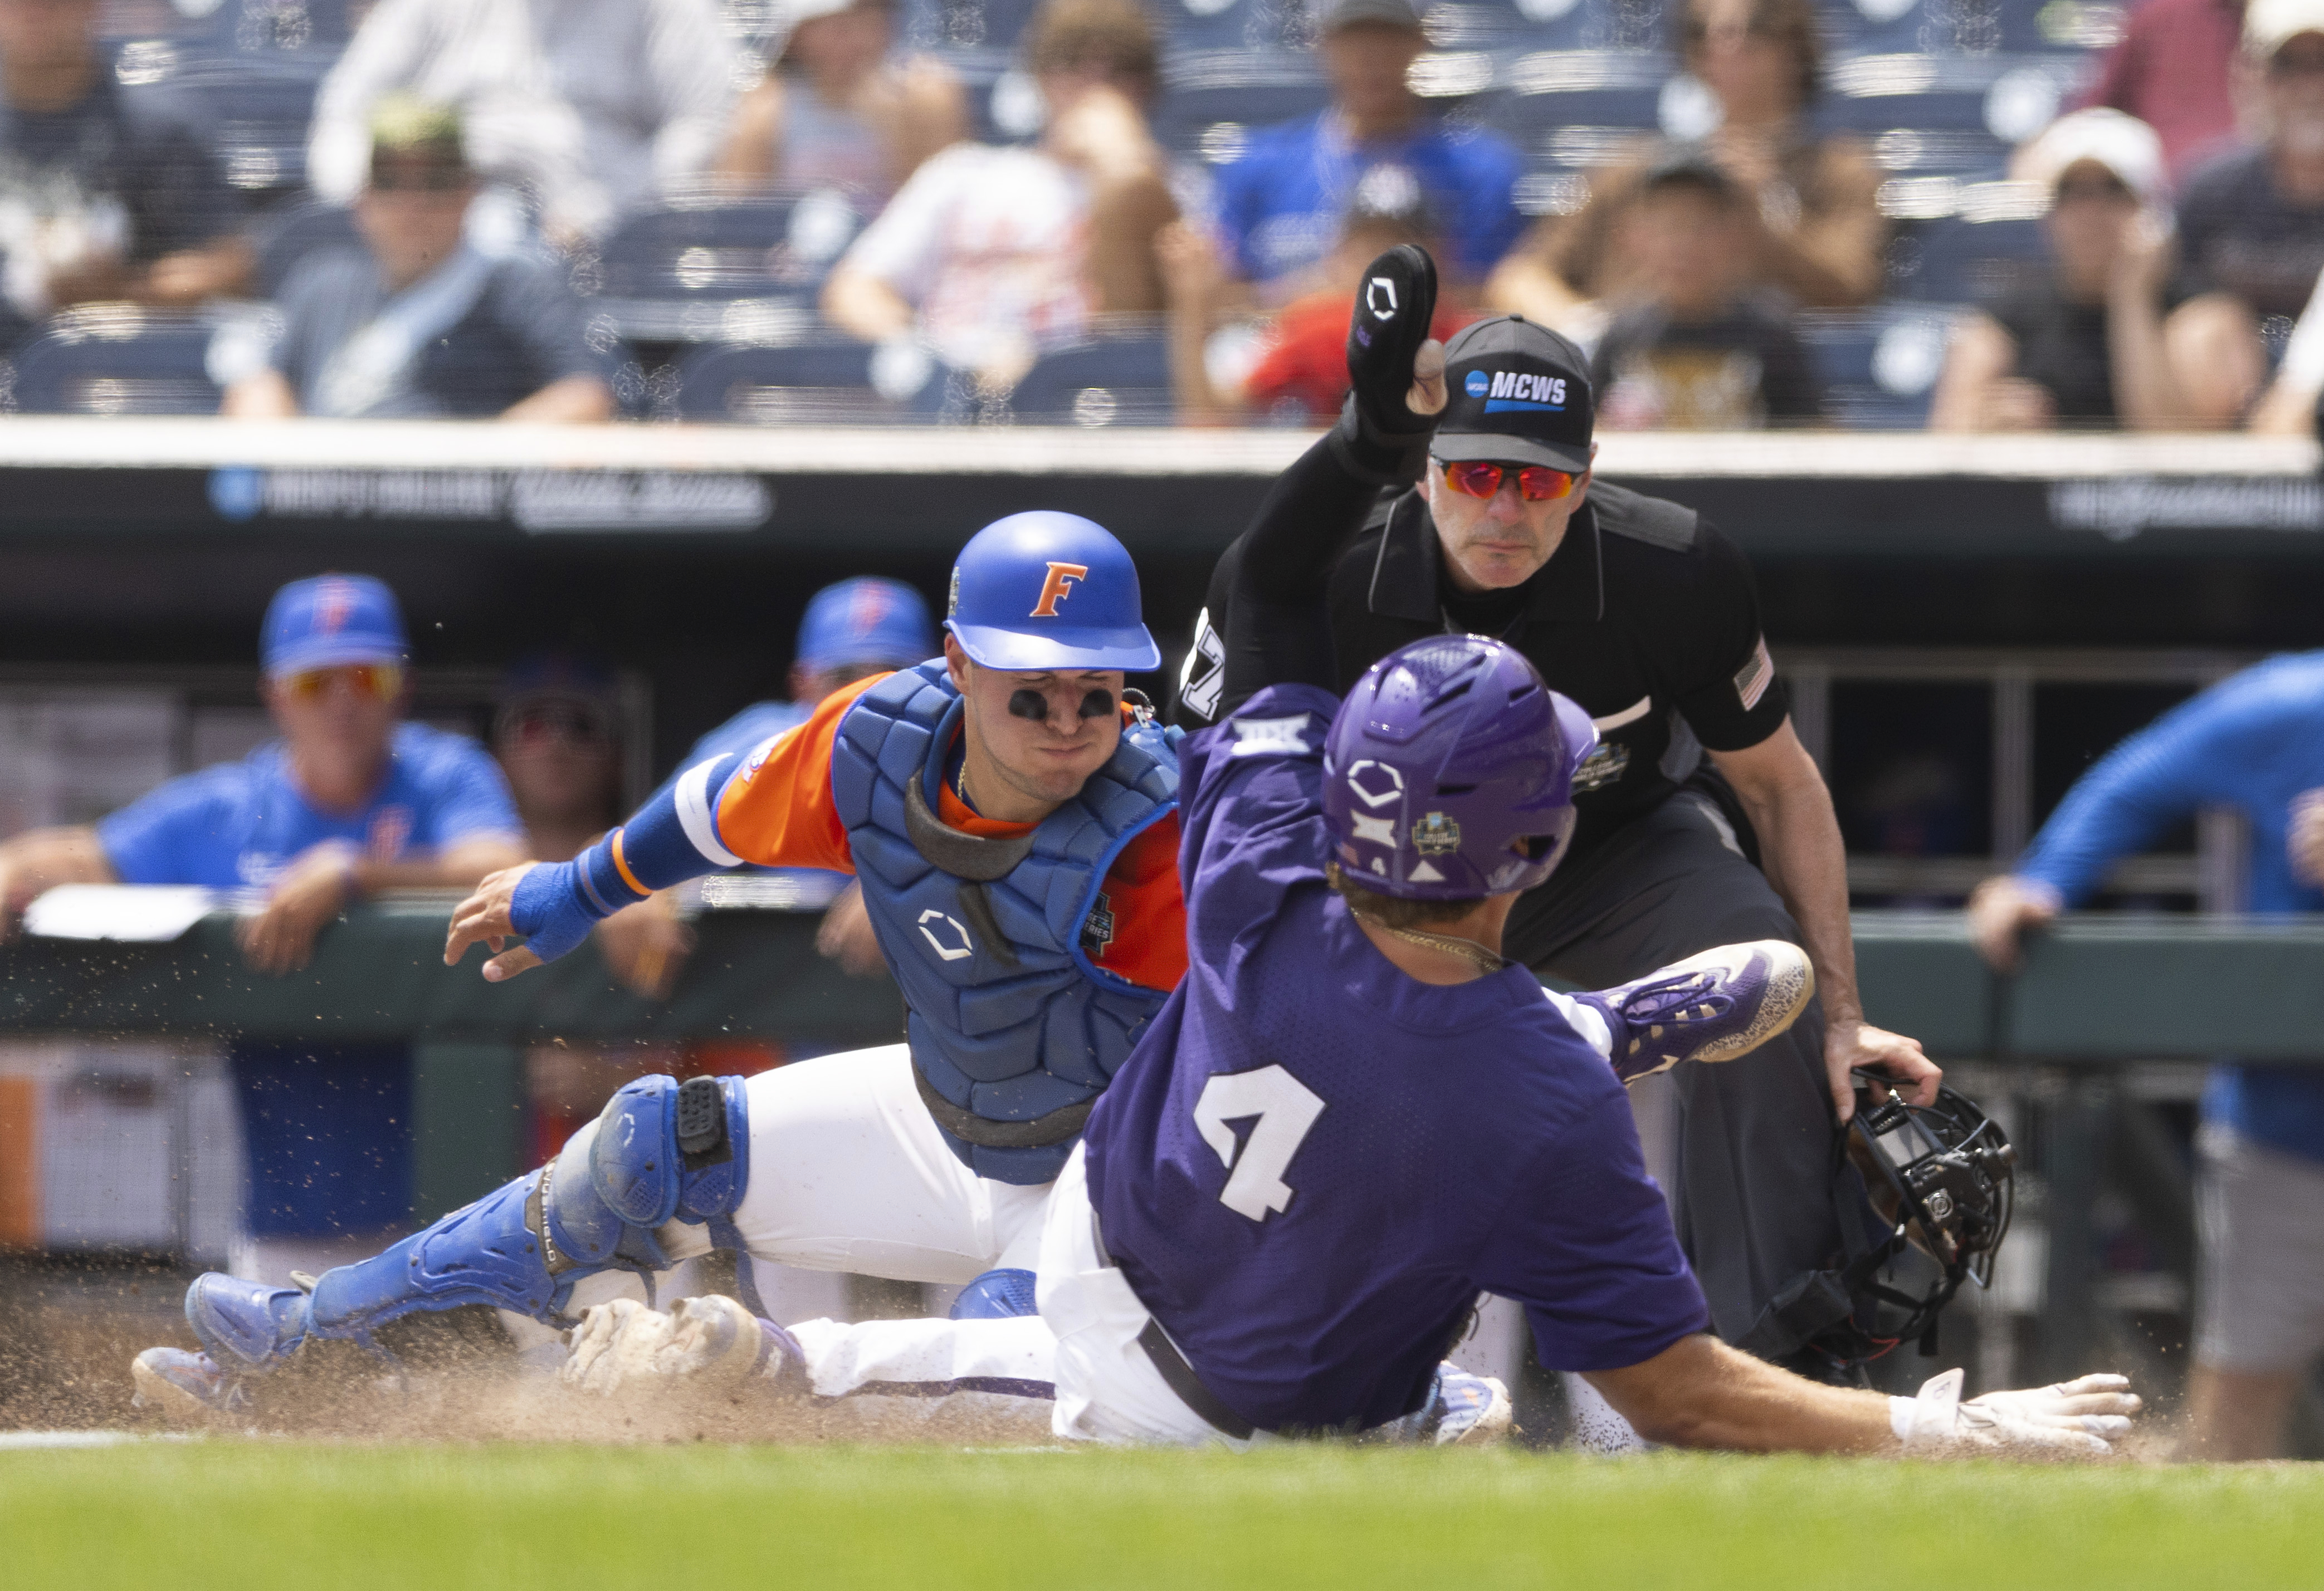 Florida baseball team advances to College World Series Finals with 3-2 win  over TCU